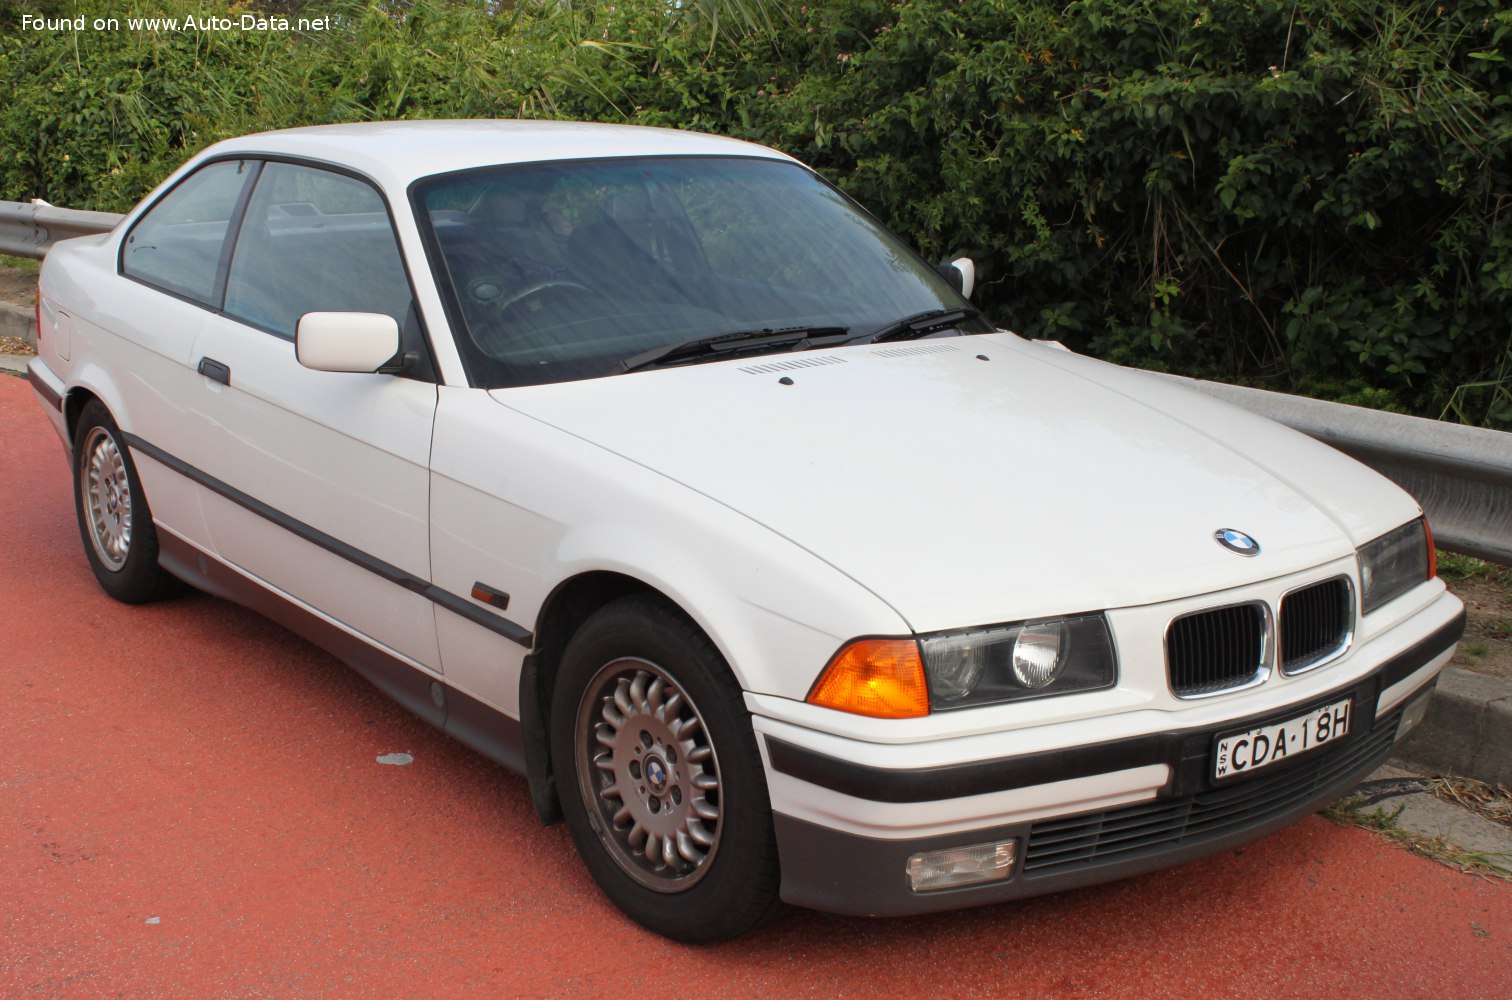 1994 Bmw 3 Series Coupe E36 320i 150 Hp Technical Specs Data Fuel Consumption Dimensions